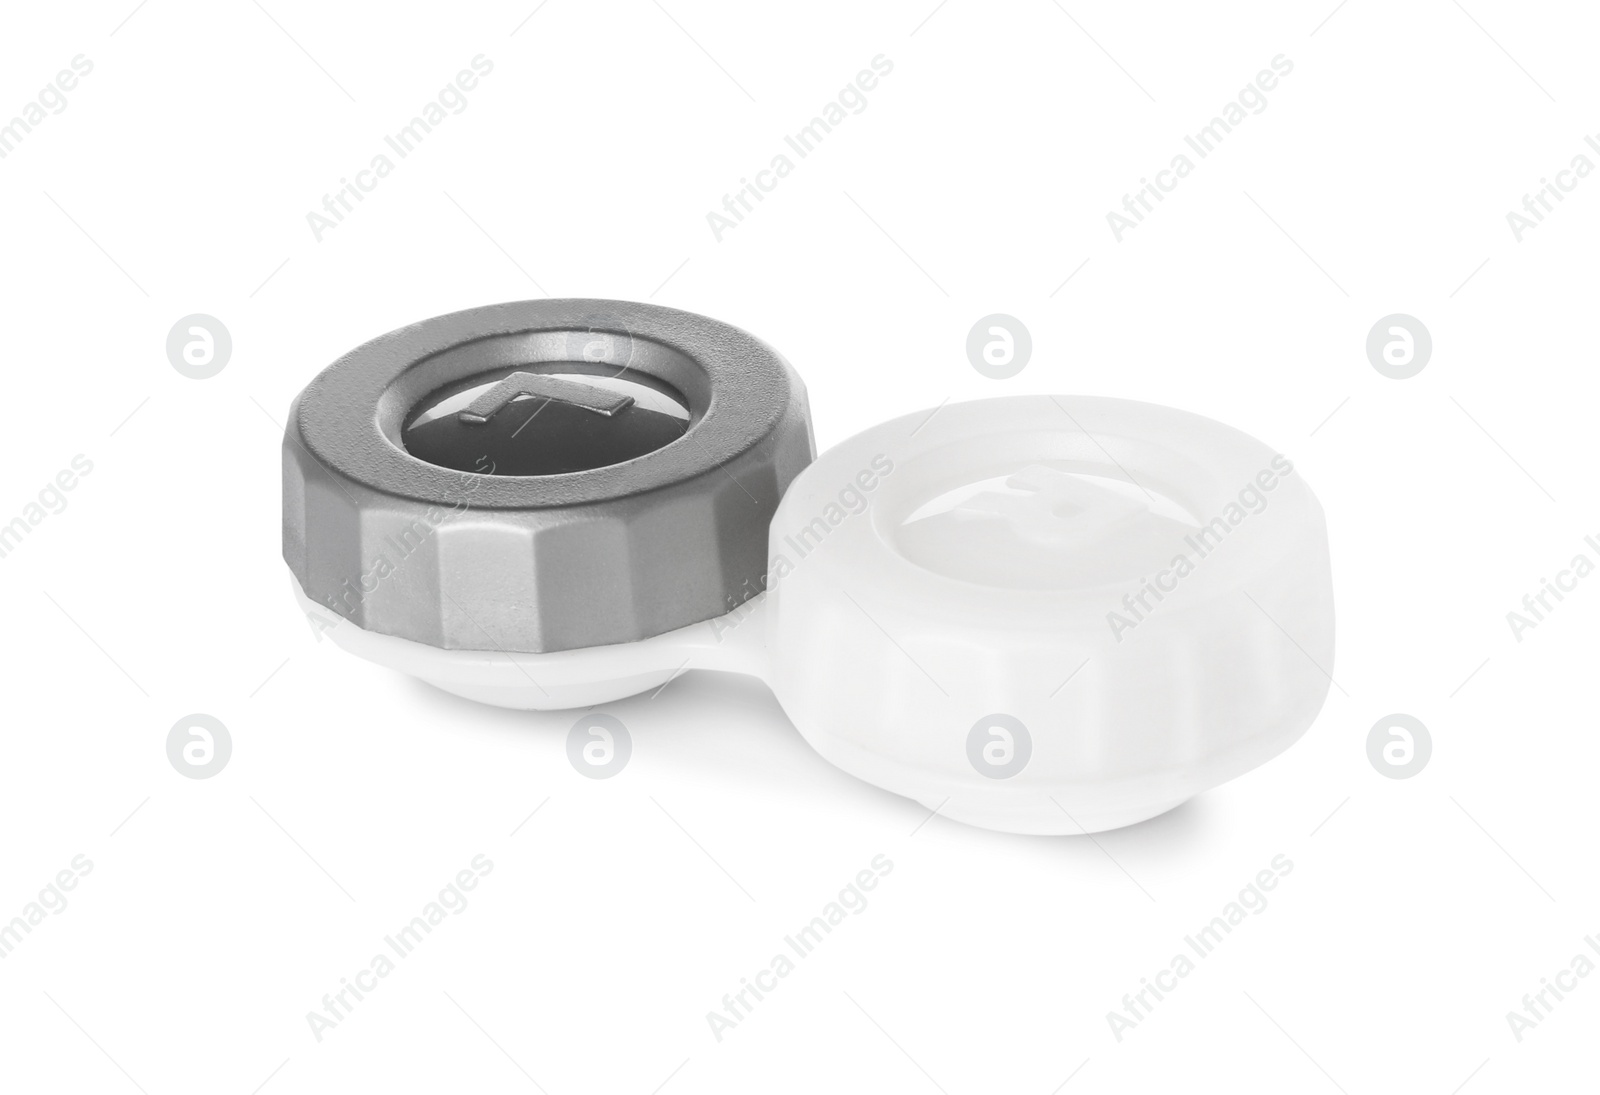 Photo of Case with contact lenses isolated on white